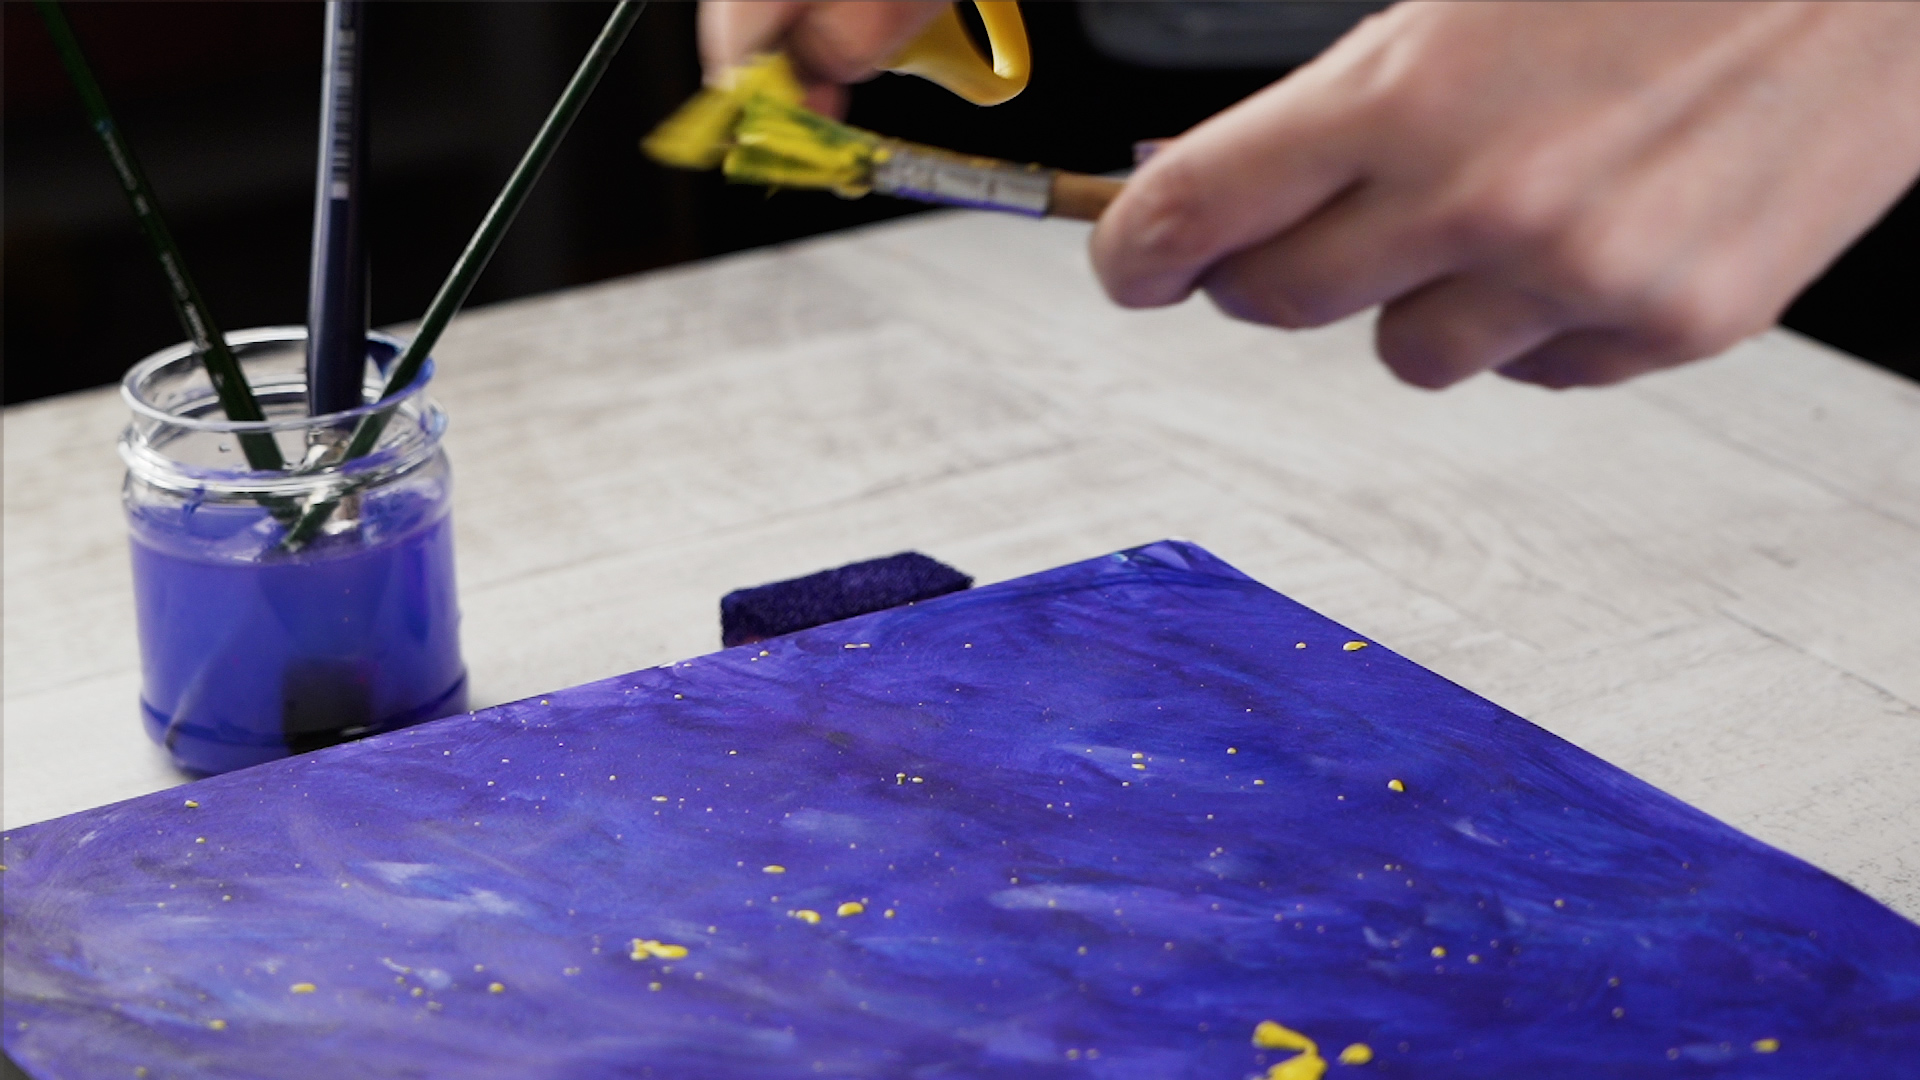 Make some yellow splashes on the paper using two brushes and yellow paint.